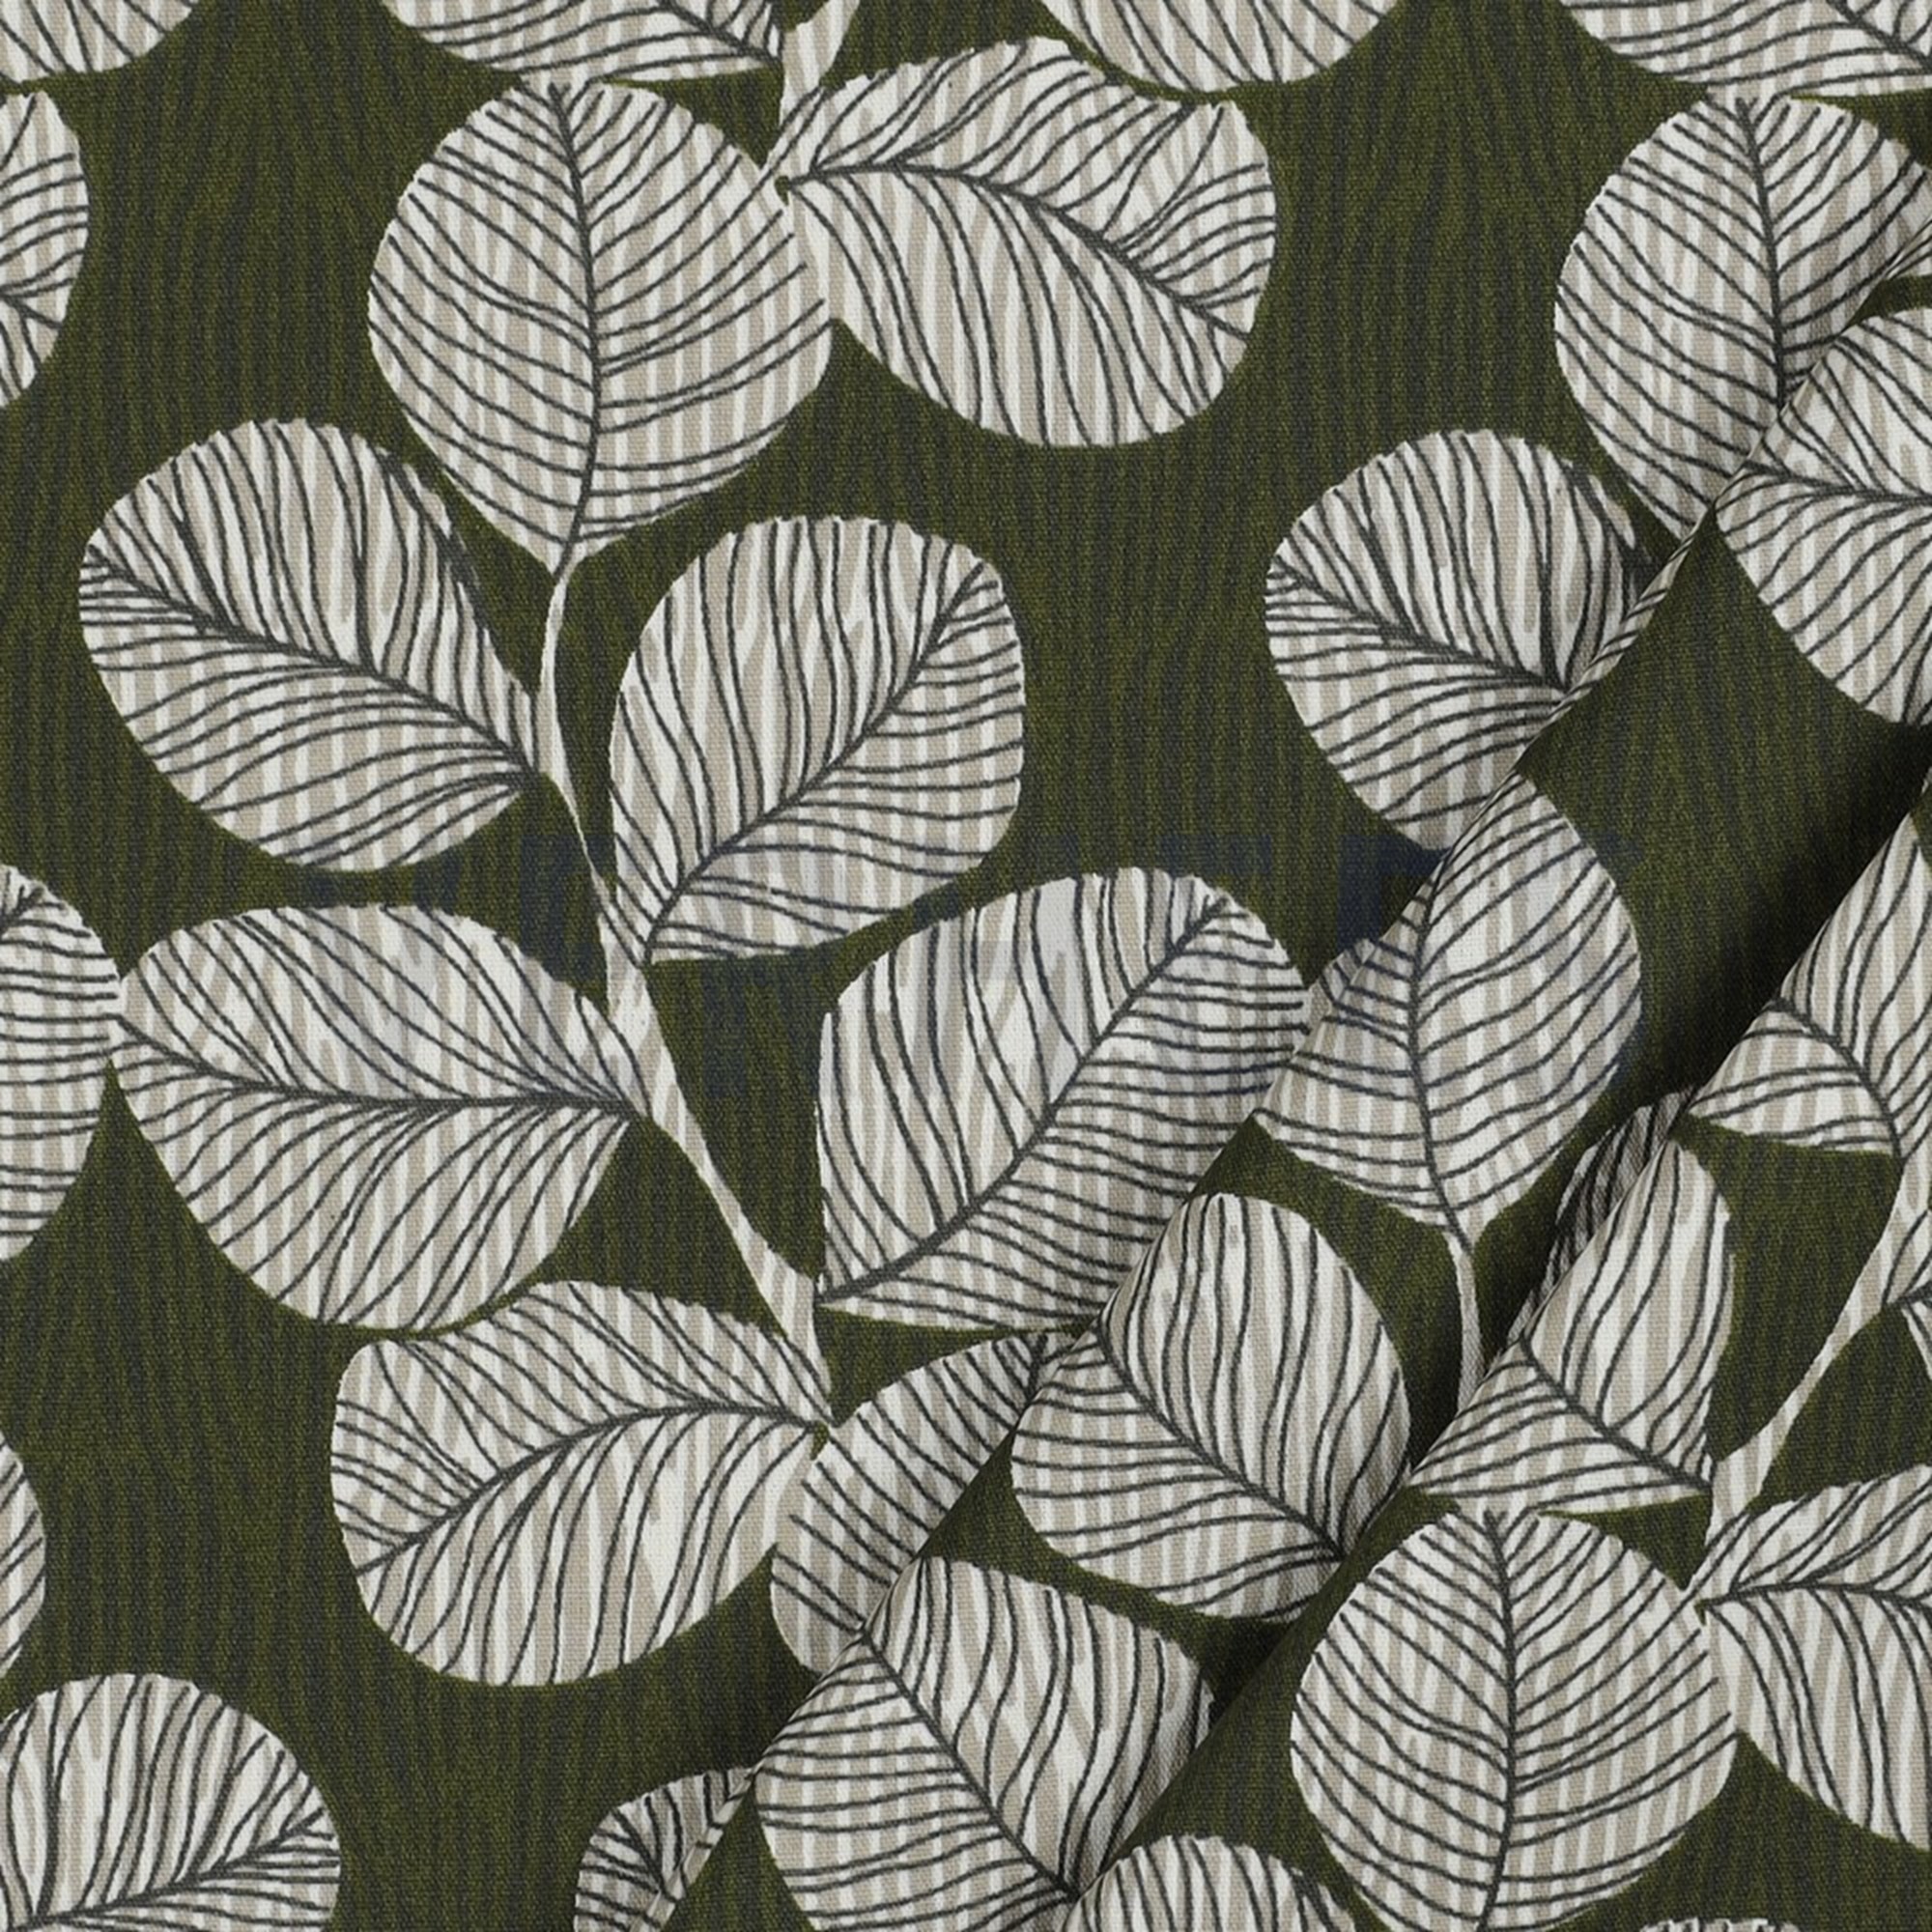 COATED COTTON LEAVES ARMY GREEN (high resolution) #3